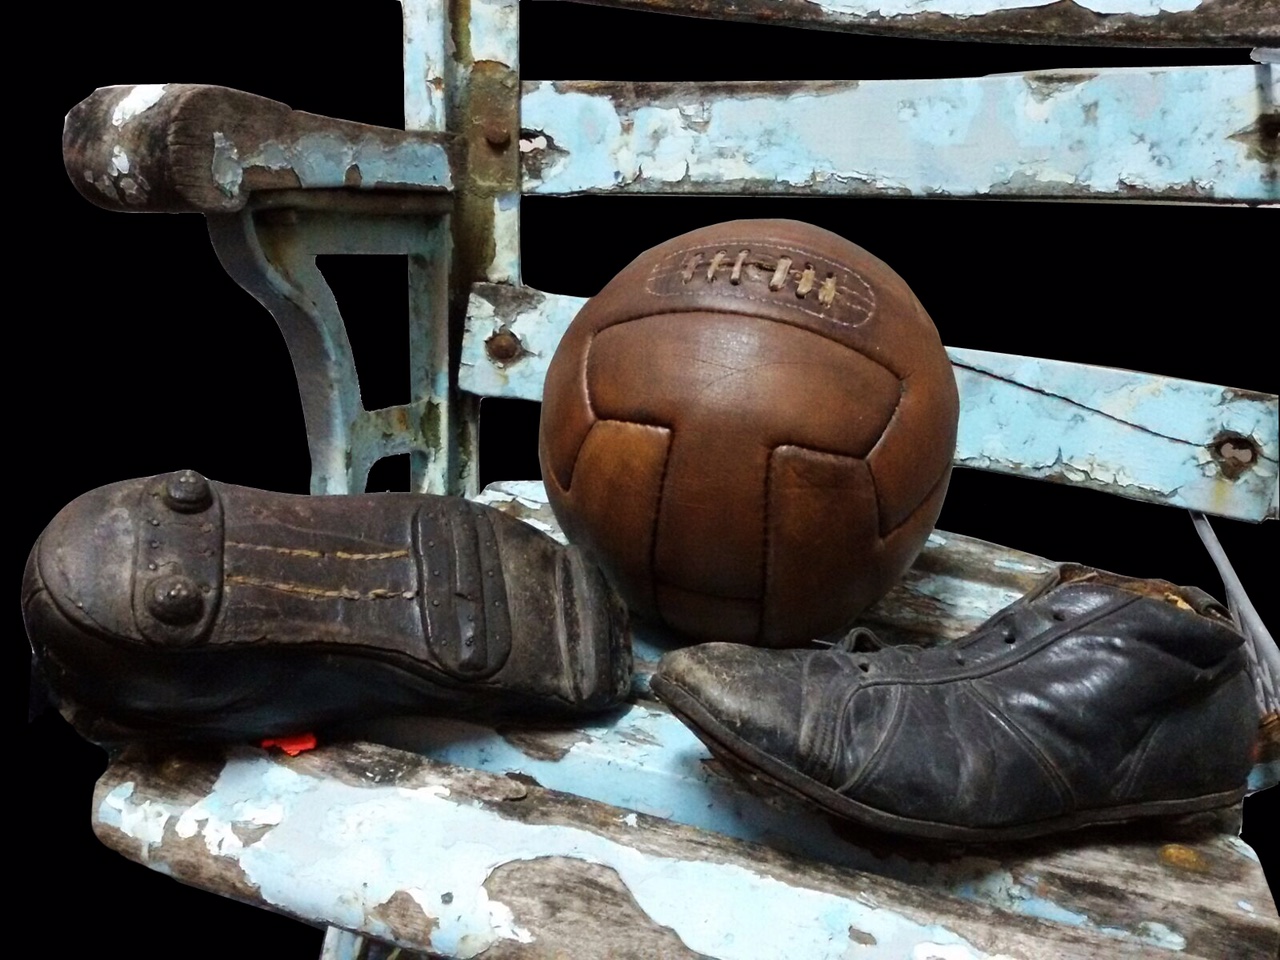 Vintage ball and shoes